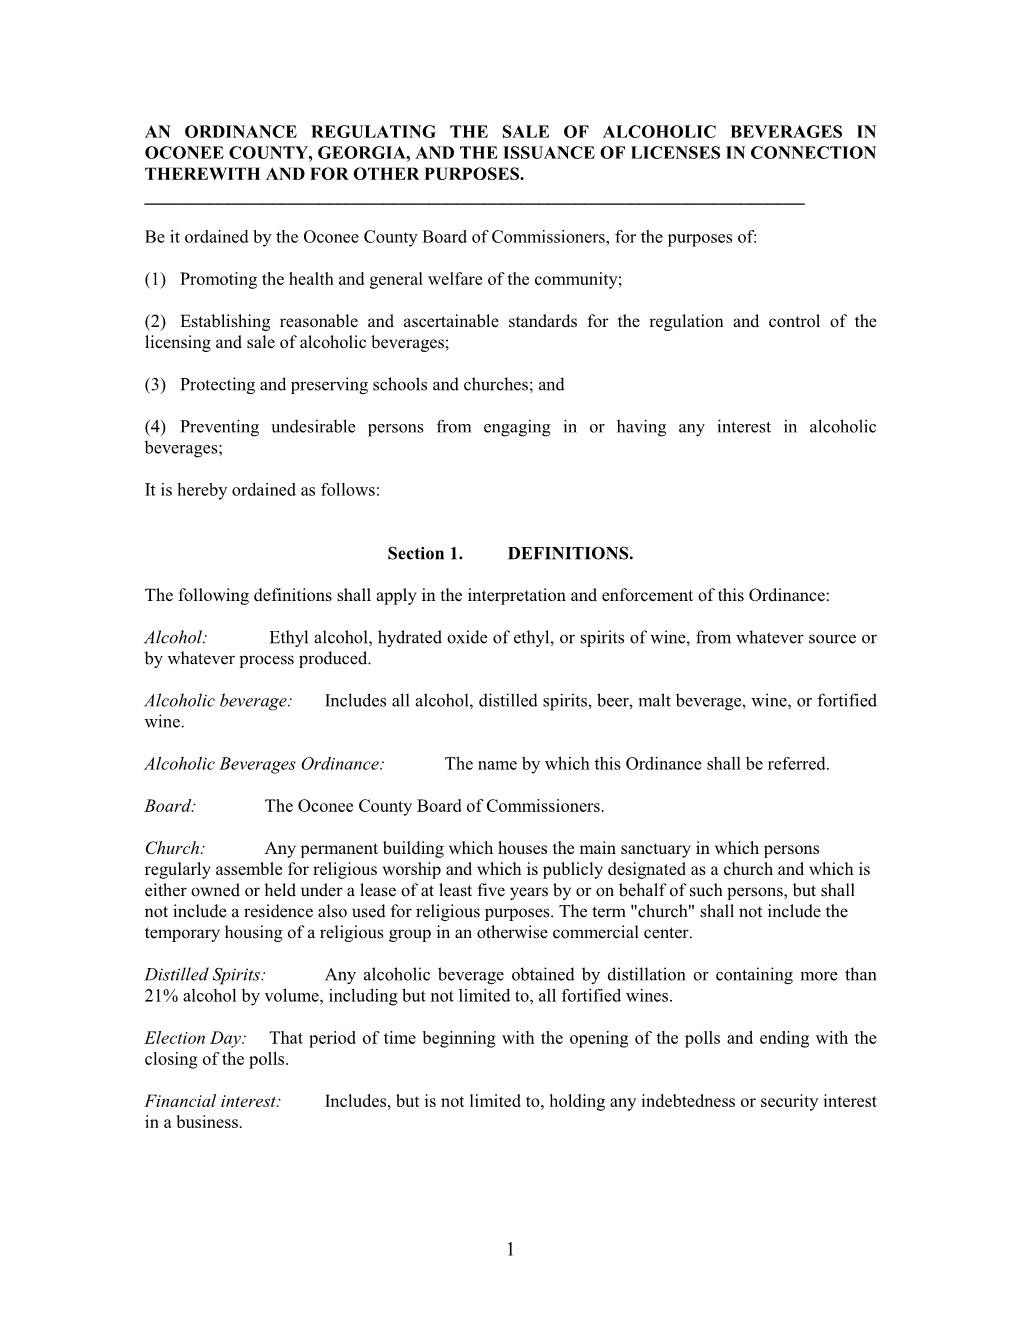 An Ordinance Regulating the Sale of Alcoholic Beverages in Oconee County, Georgia, and the Issuance of Licenses in Connection Therewith and for Other Purposes